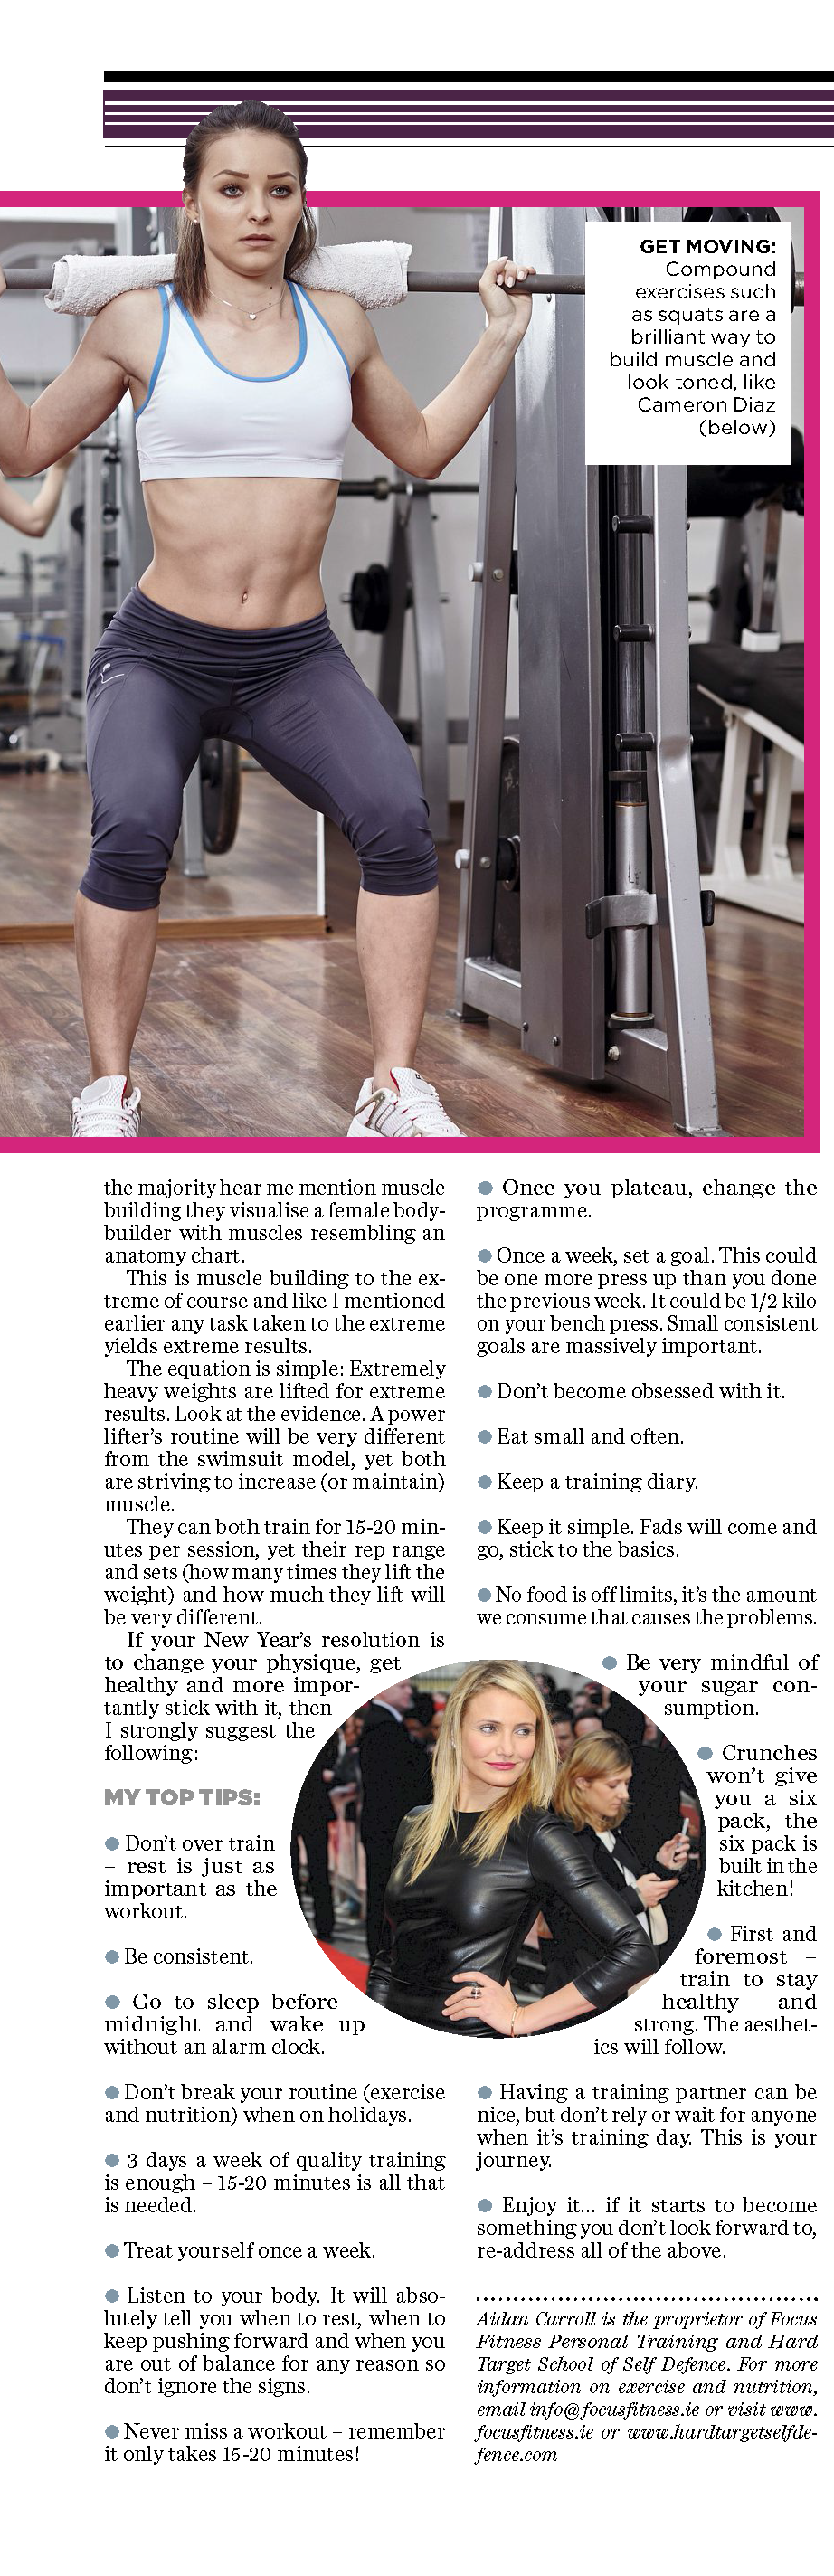 Evening Herald A Fit New You Article